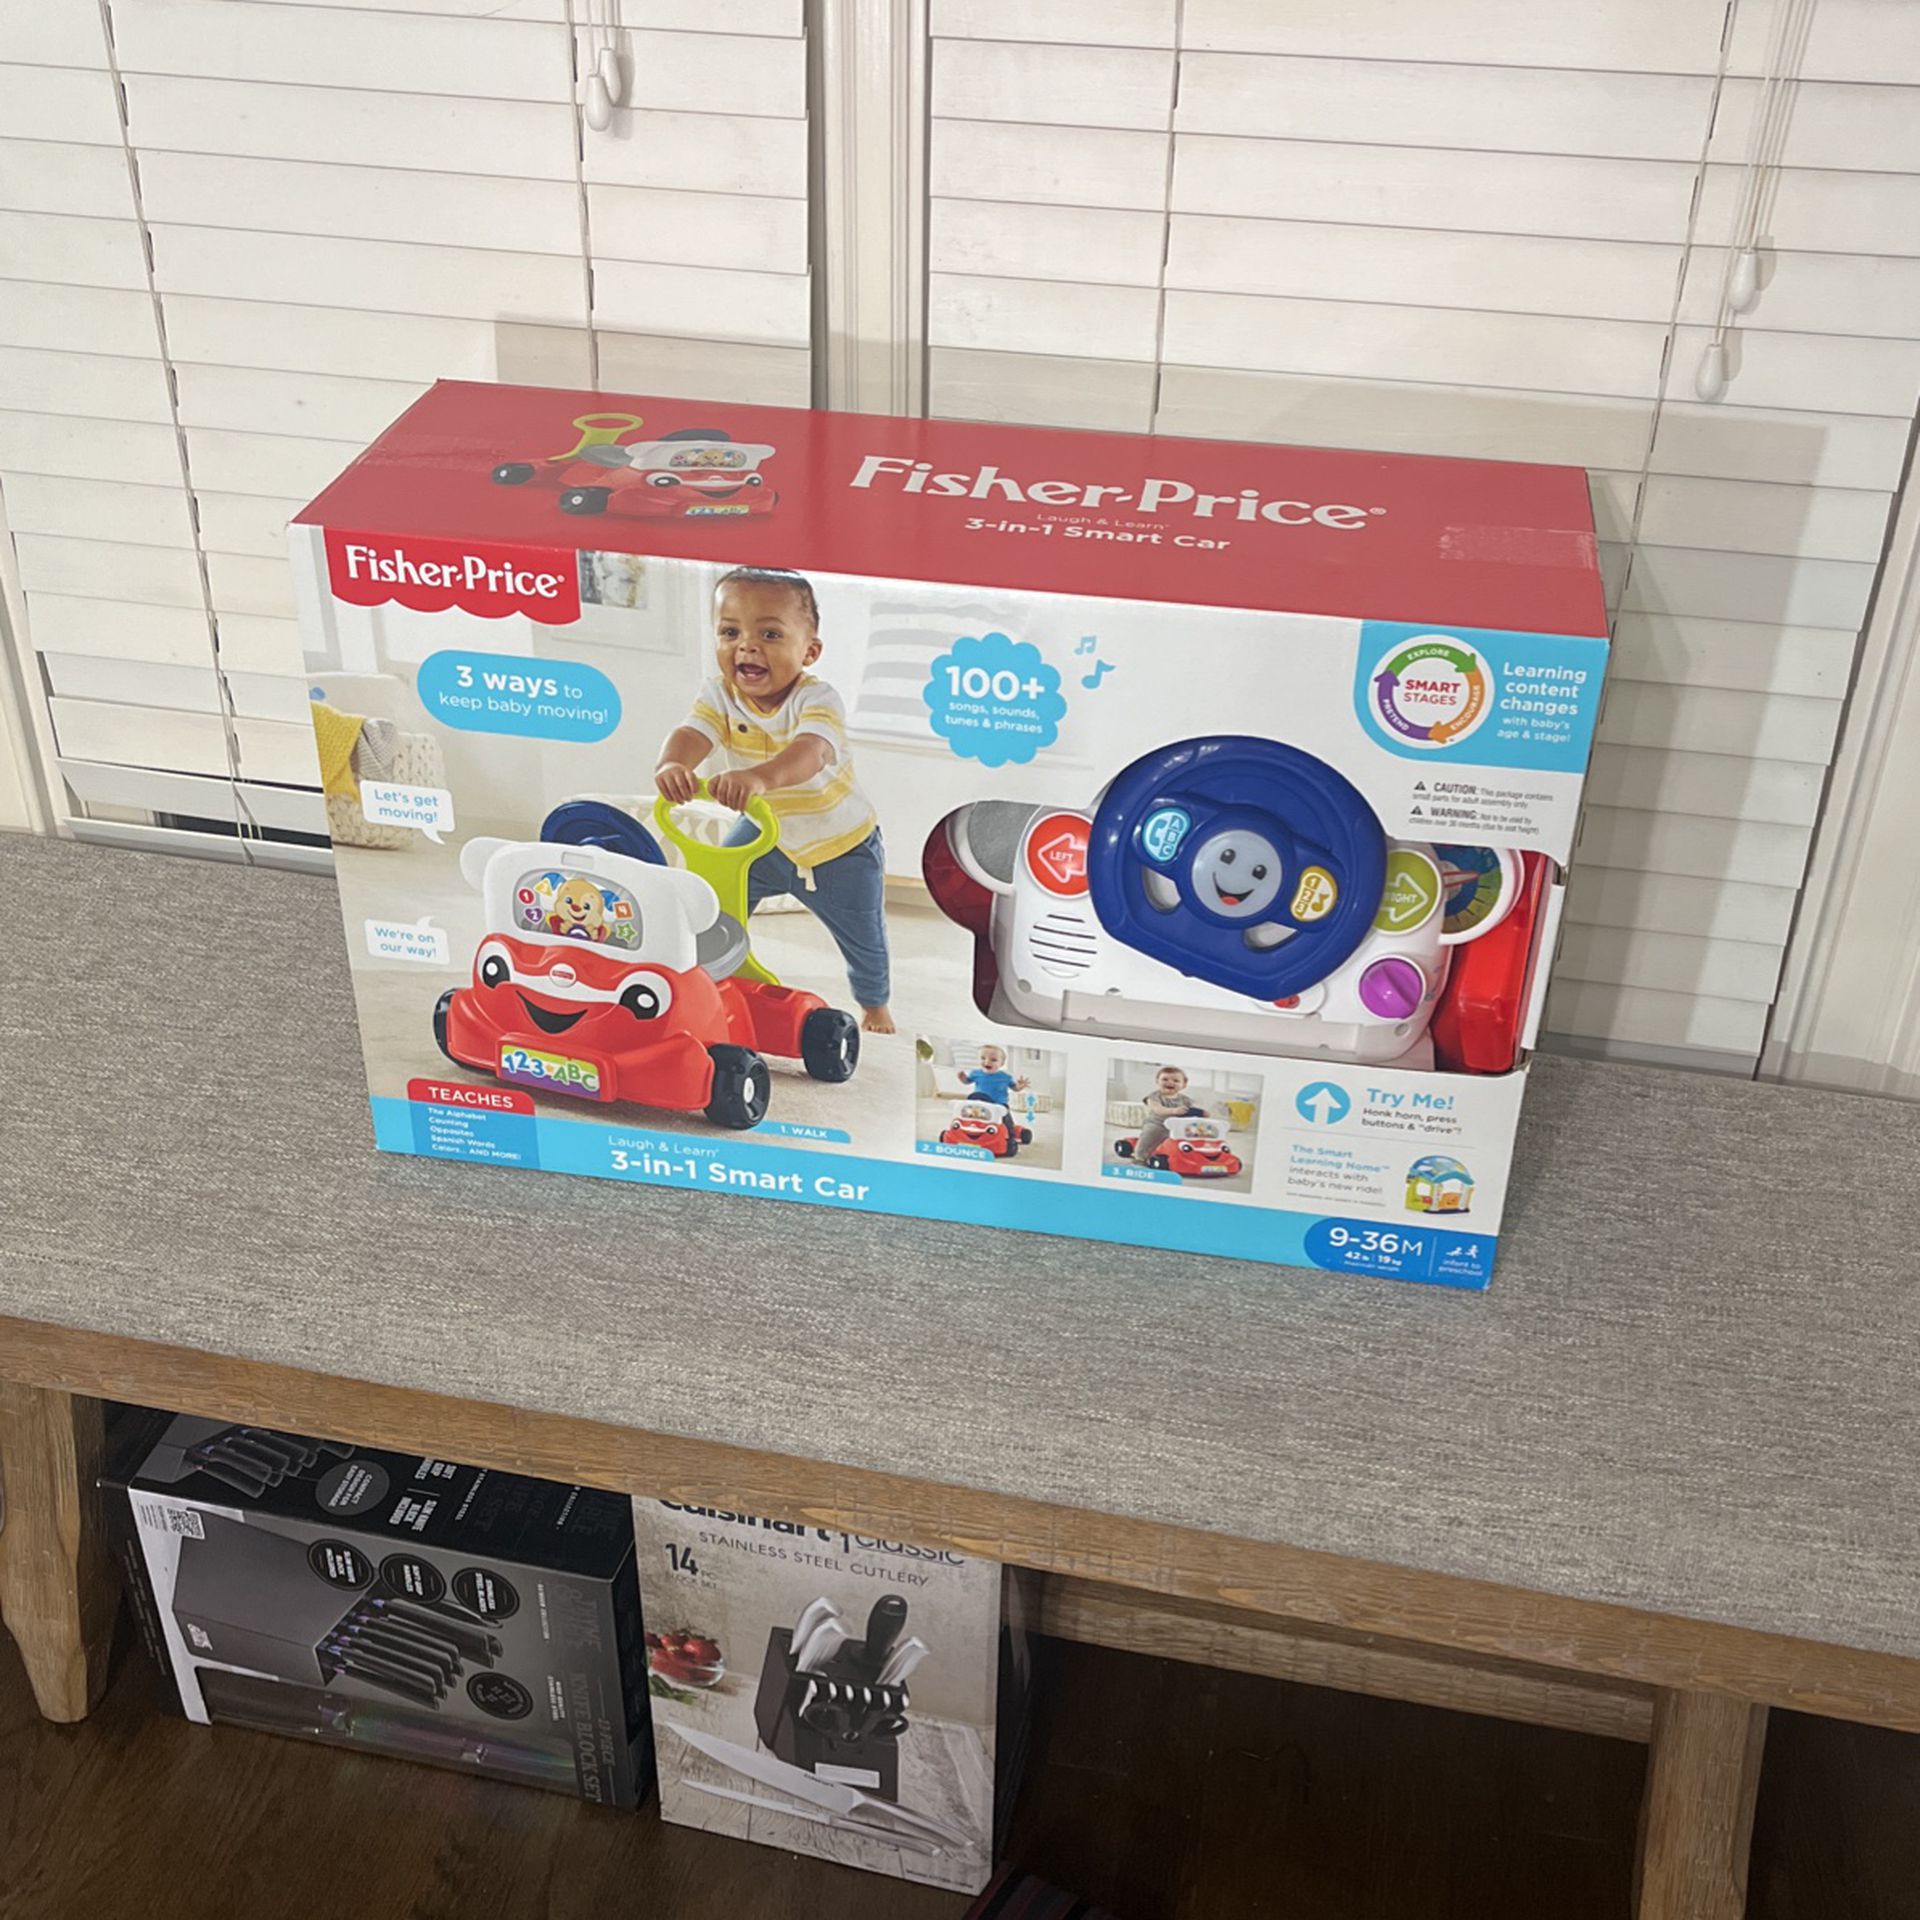 BRAND NEW $50 FISHER PRICE 3-N-1 RIDE BOUNCE & WALKING SMART CAR FIRE ONLY $35